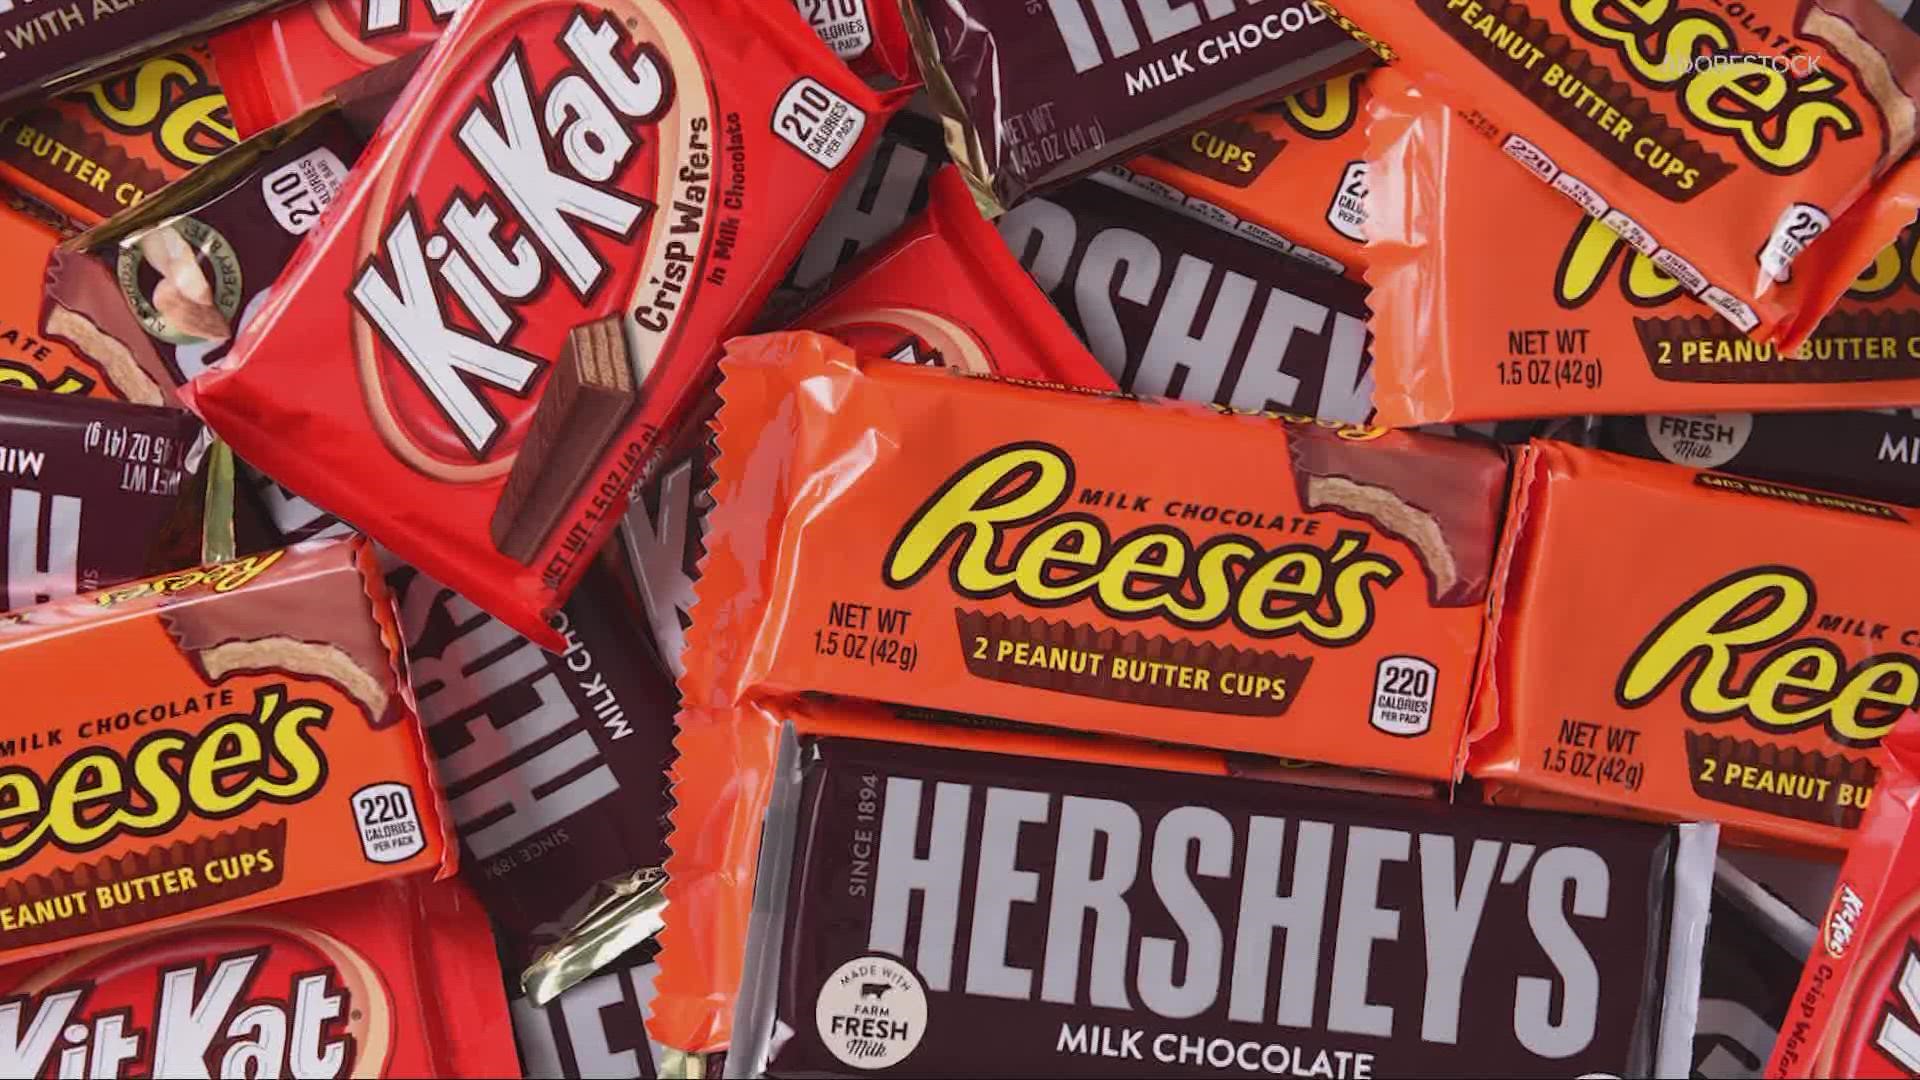 With candy sales surging, supply chain issues are causing companies to struggle to keep up with demand. That might wreak havoc on your Halloween plans.